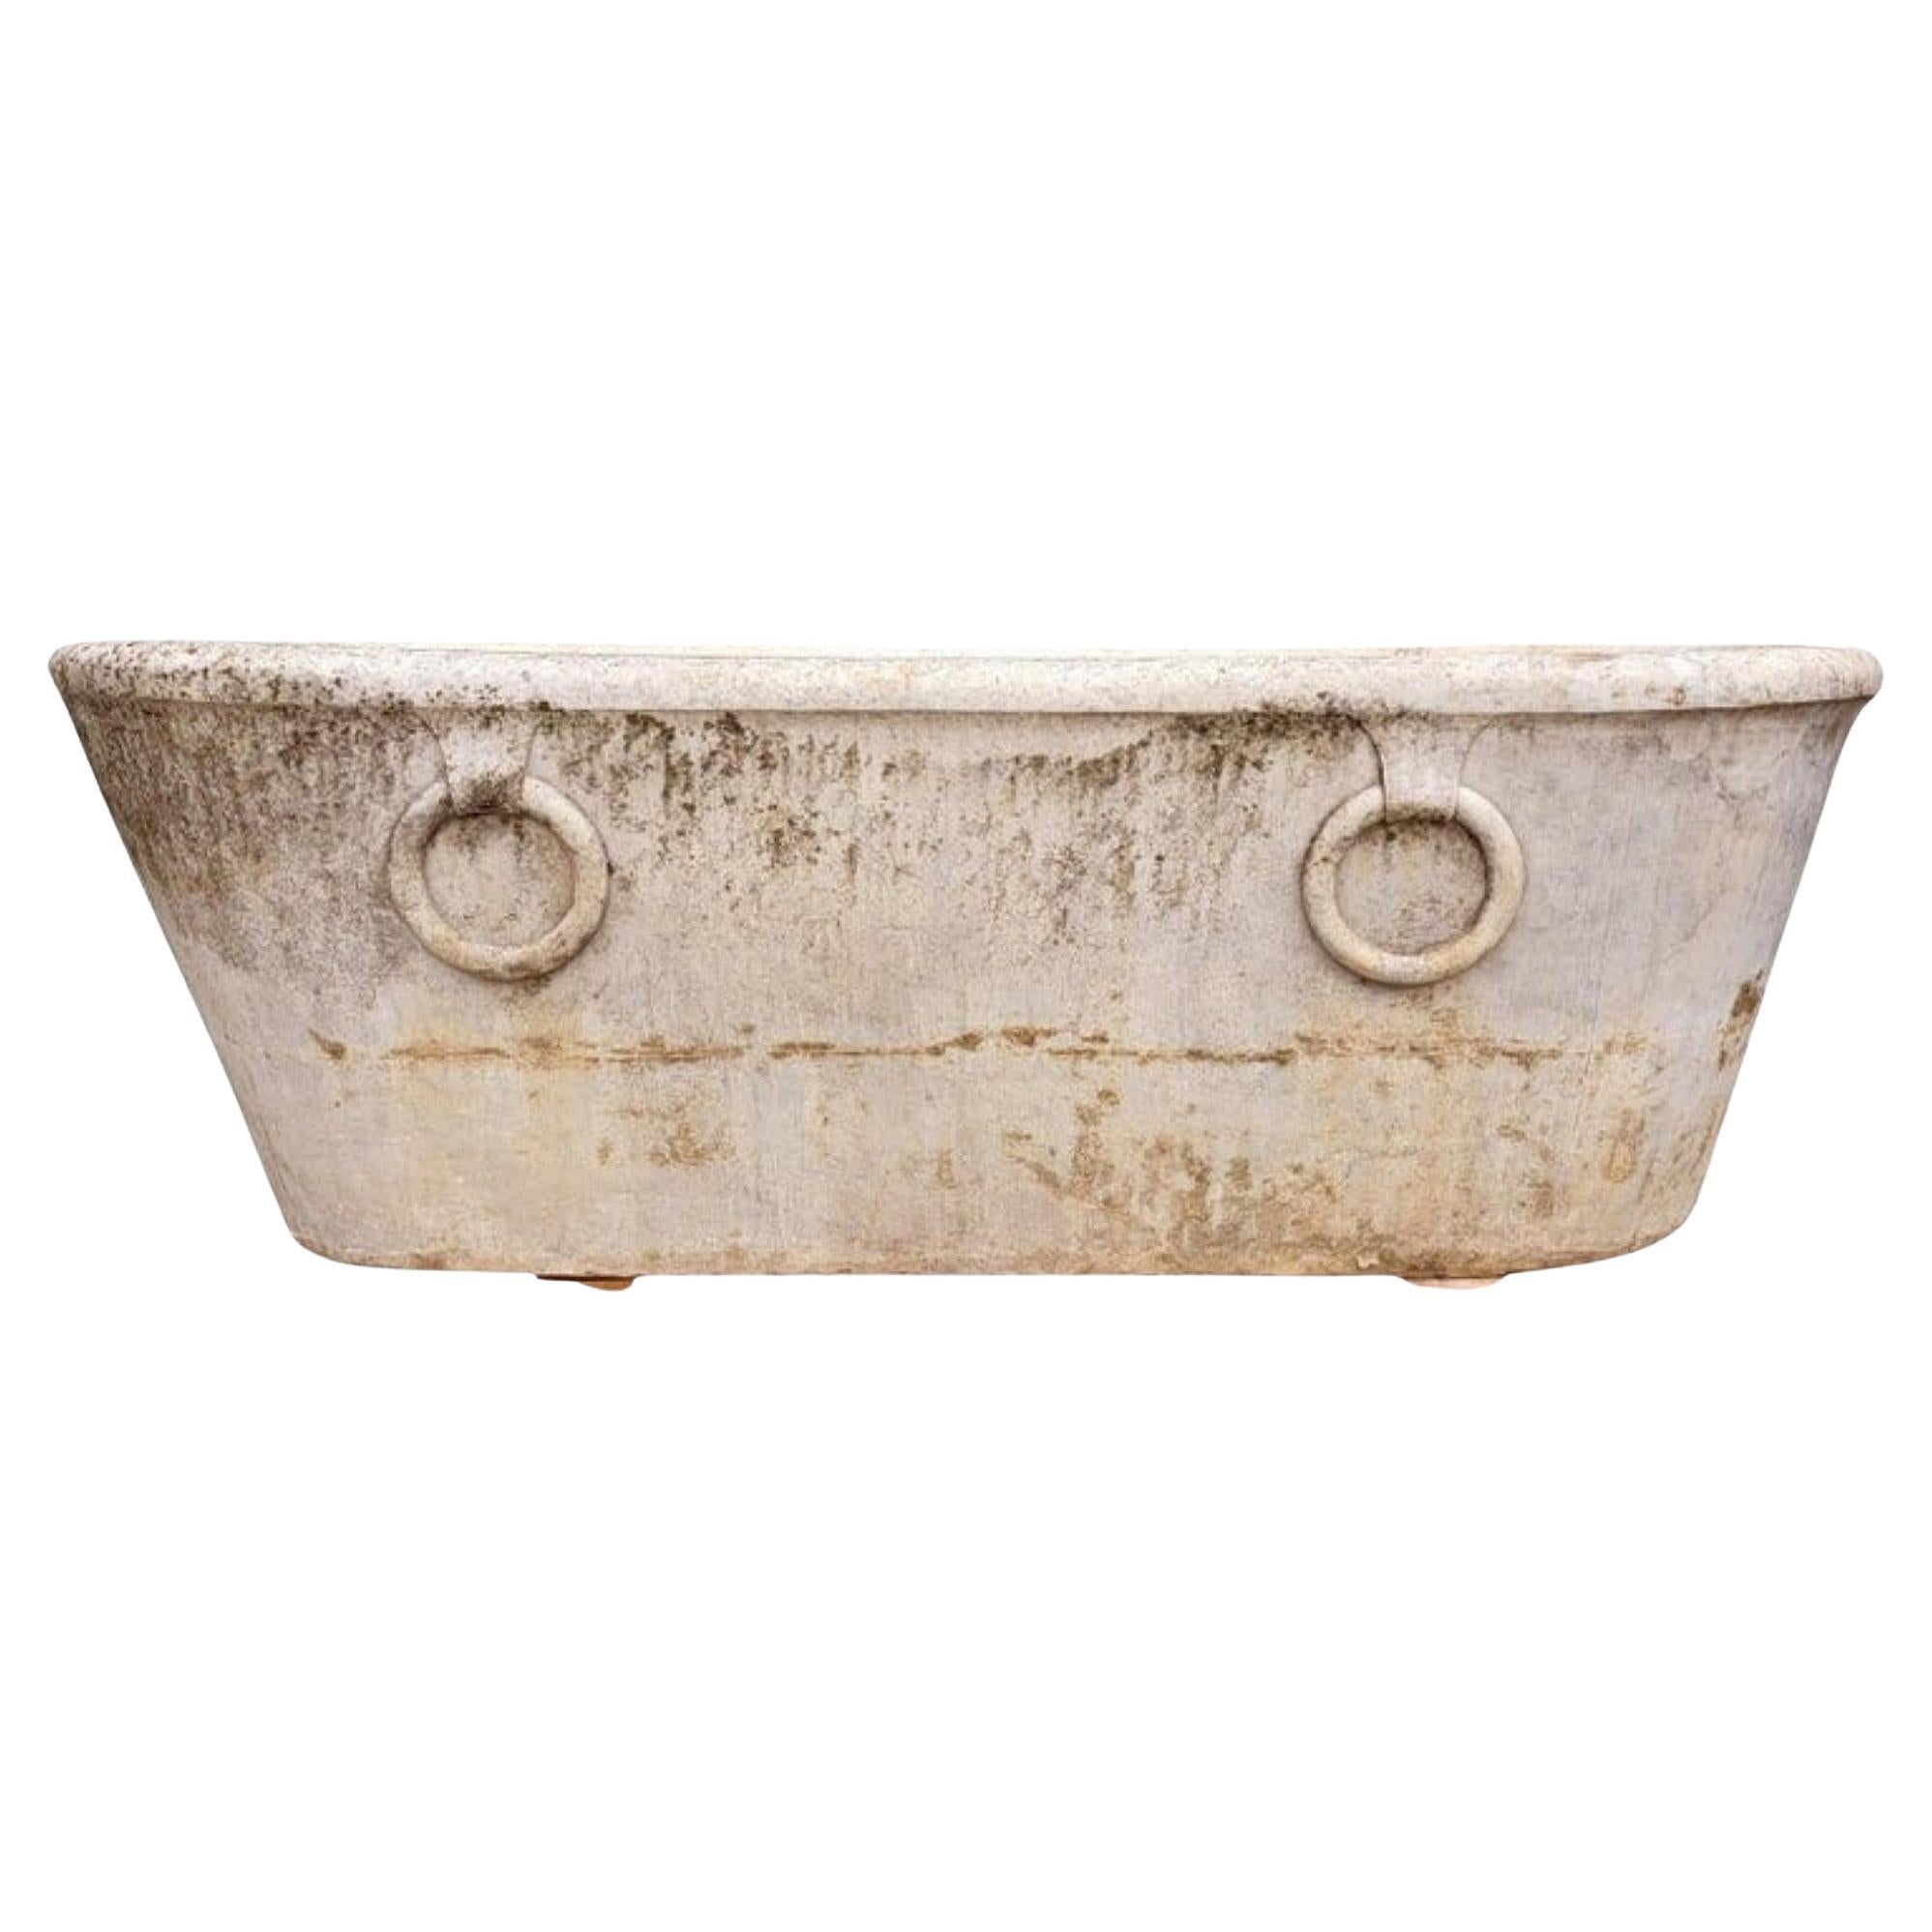 Amazing Antique Bathtub in Carrara White Marble with Rings 18th Century For Sale